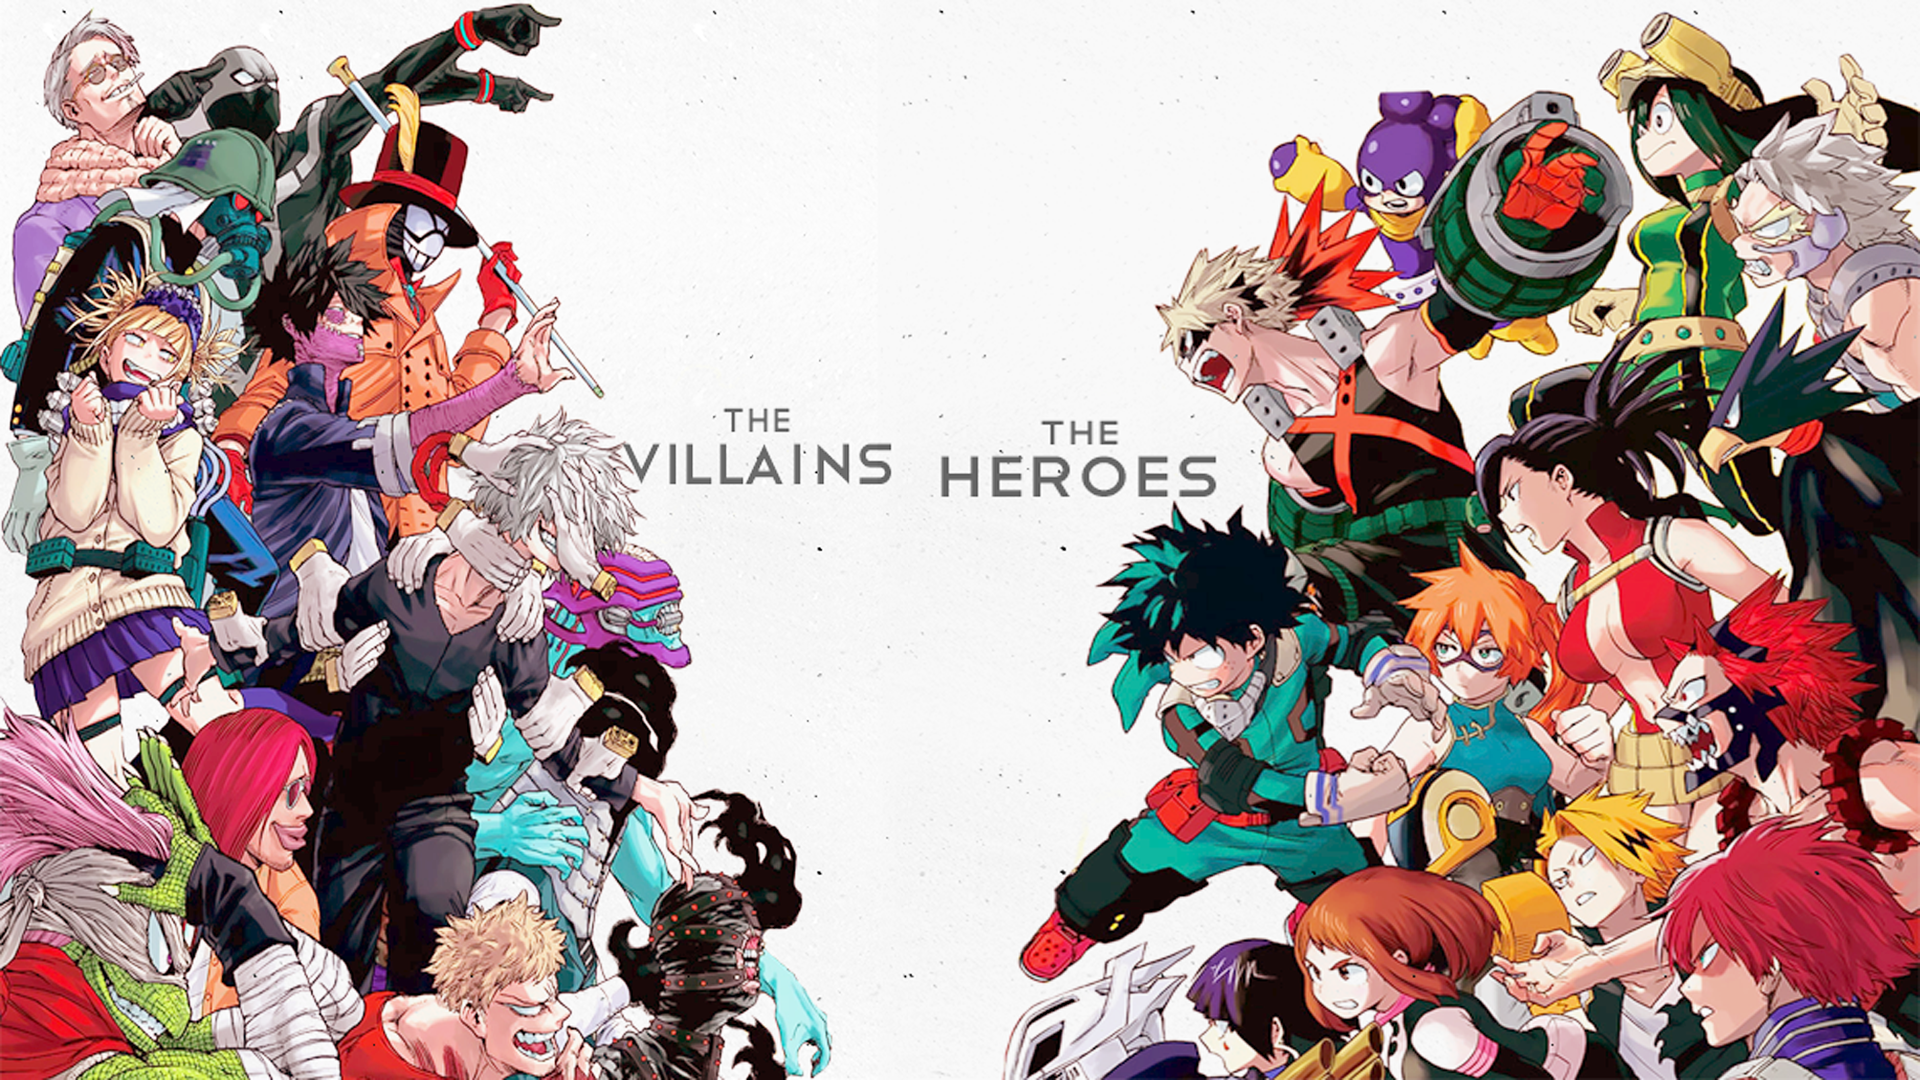 The Villains Vs The Heroes by ASR-94